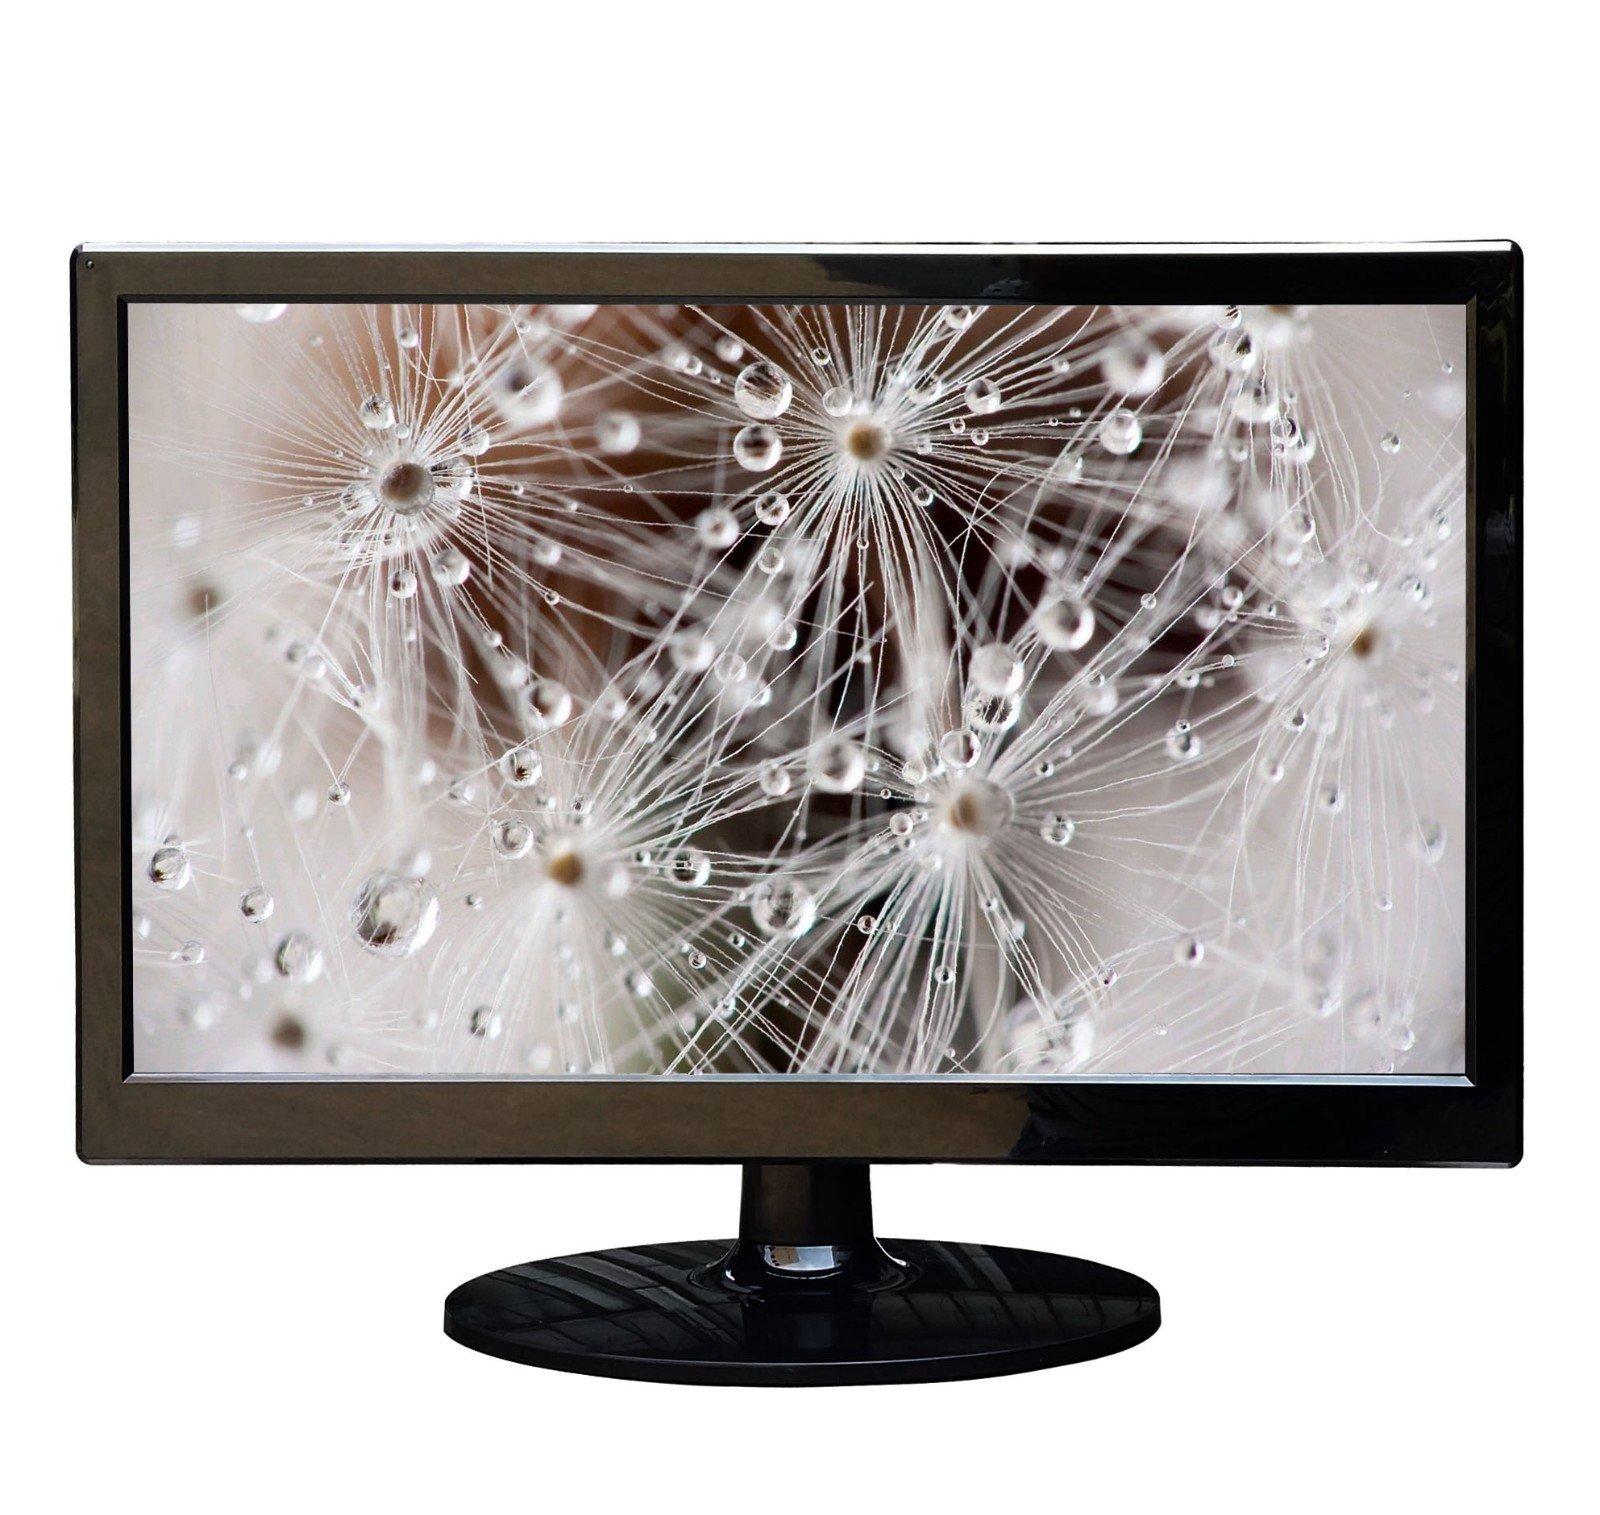 low price monitor 18.5 inch price with laptop panel for tv screen